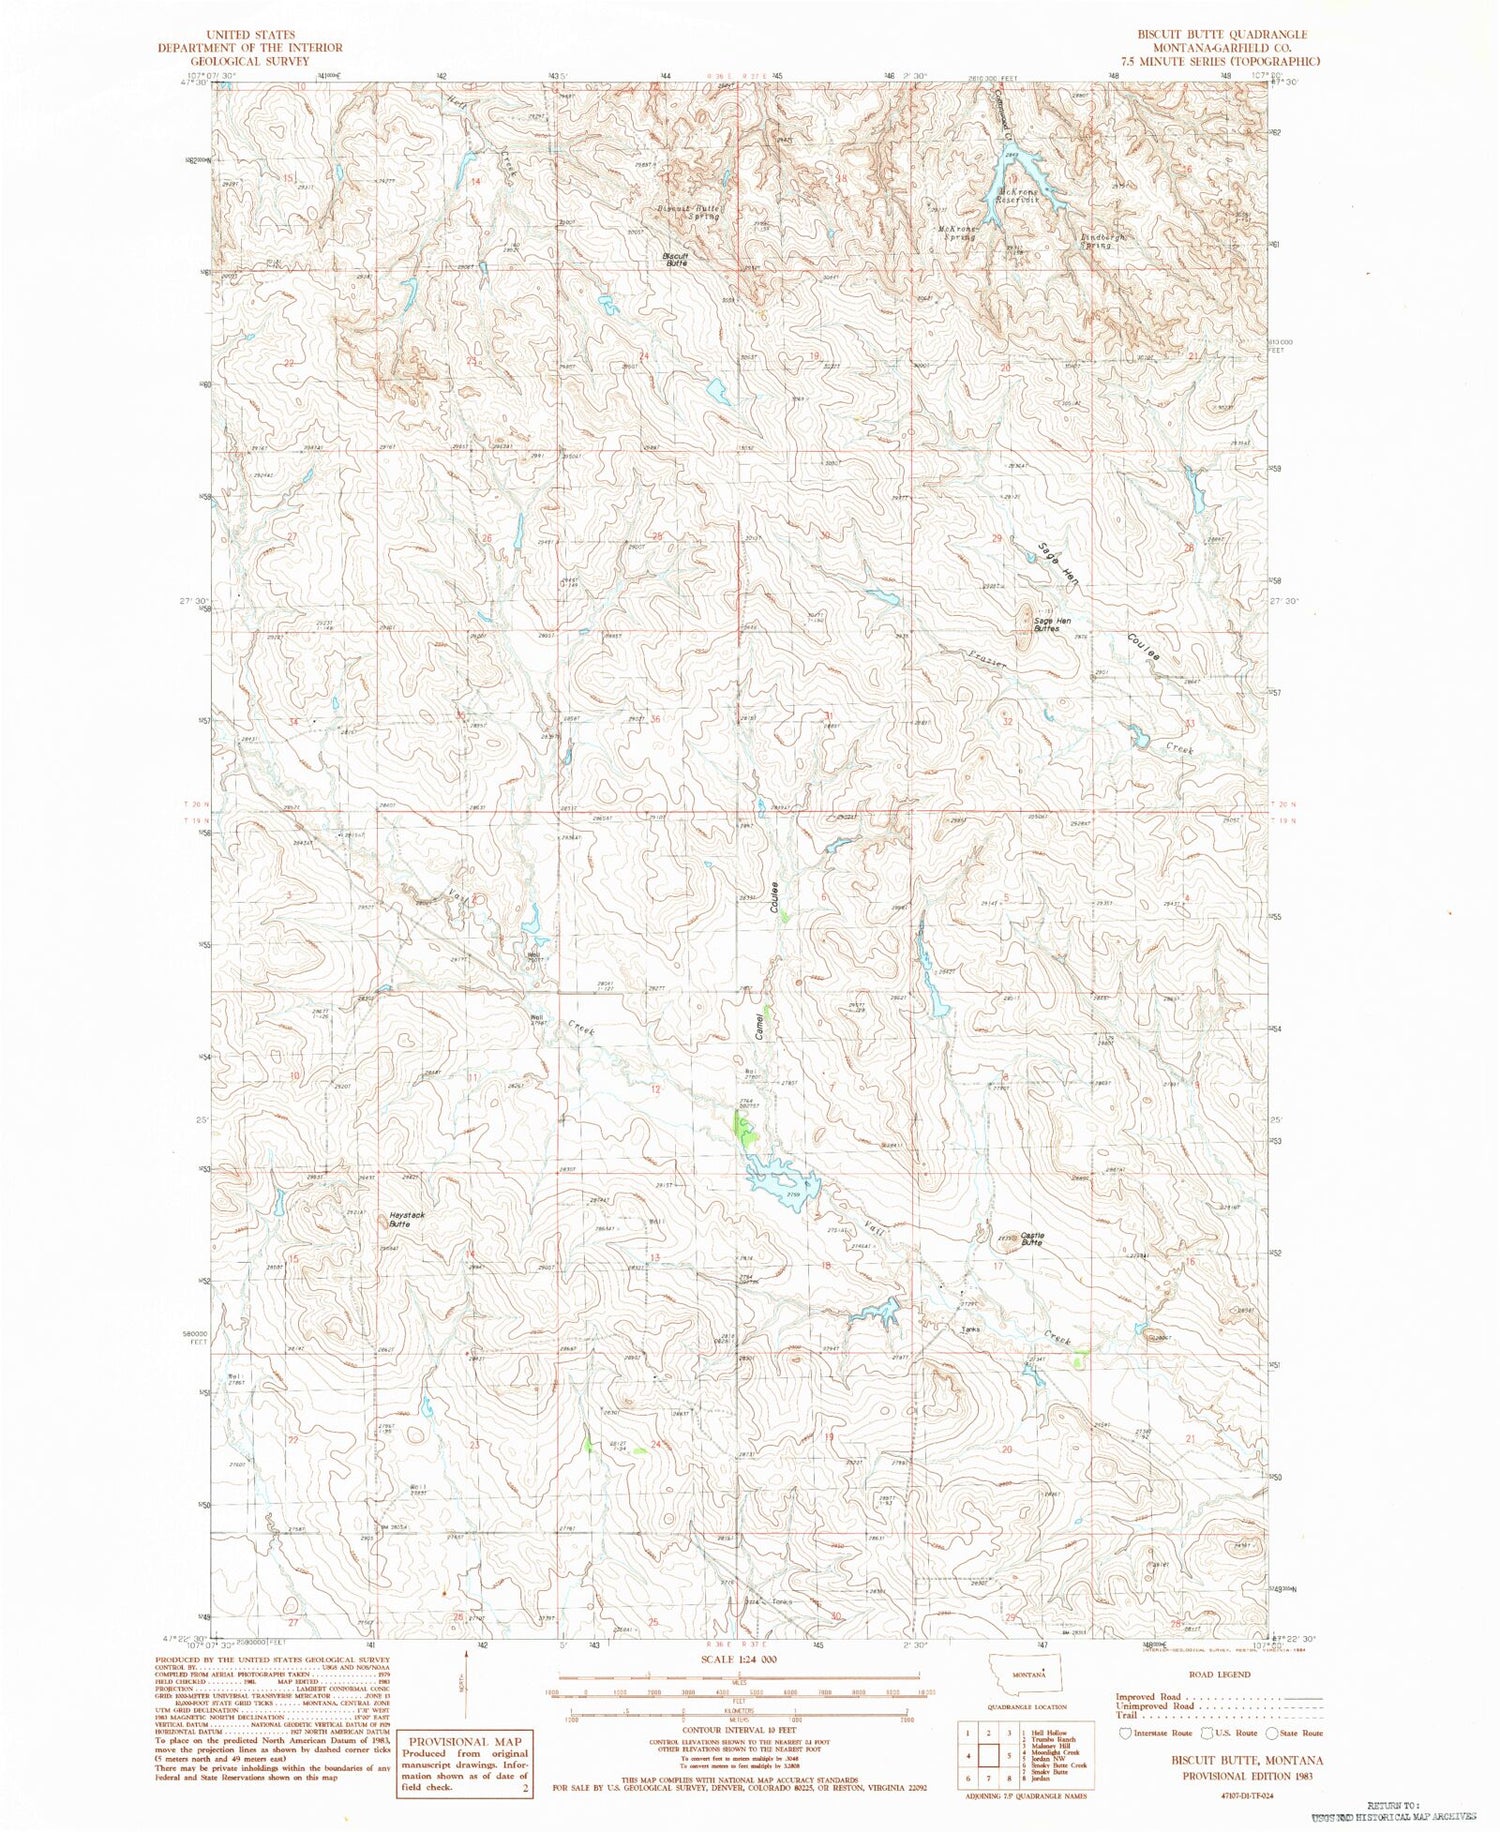 Classic USGS Biscuit Butte Montana 7.5'x7.5' Topo Map Image